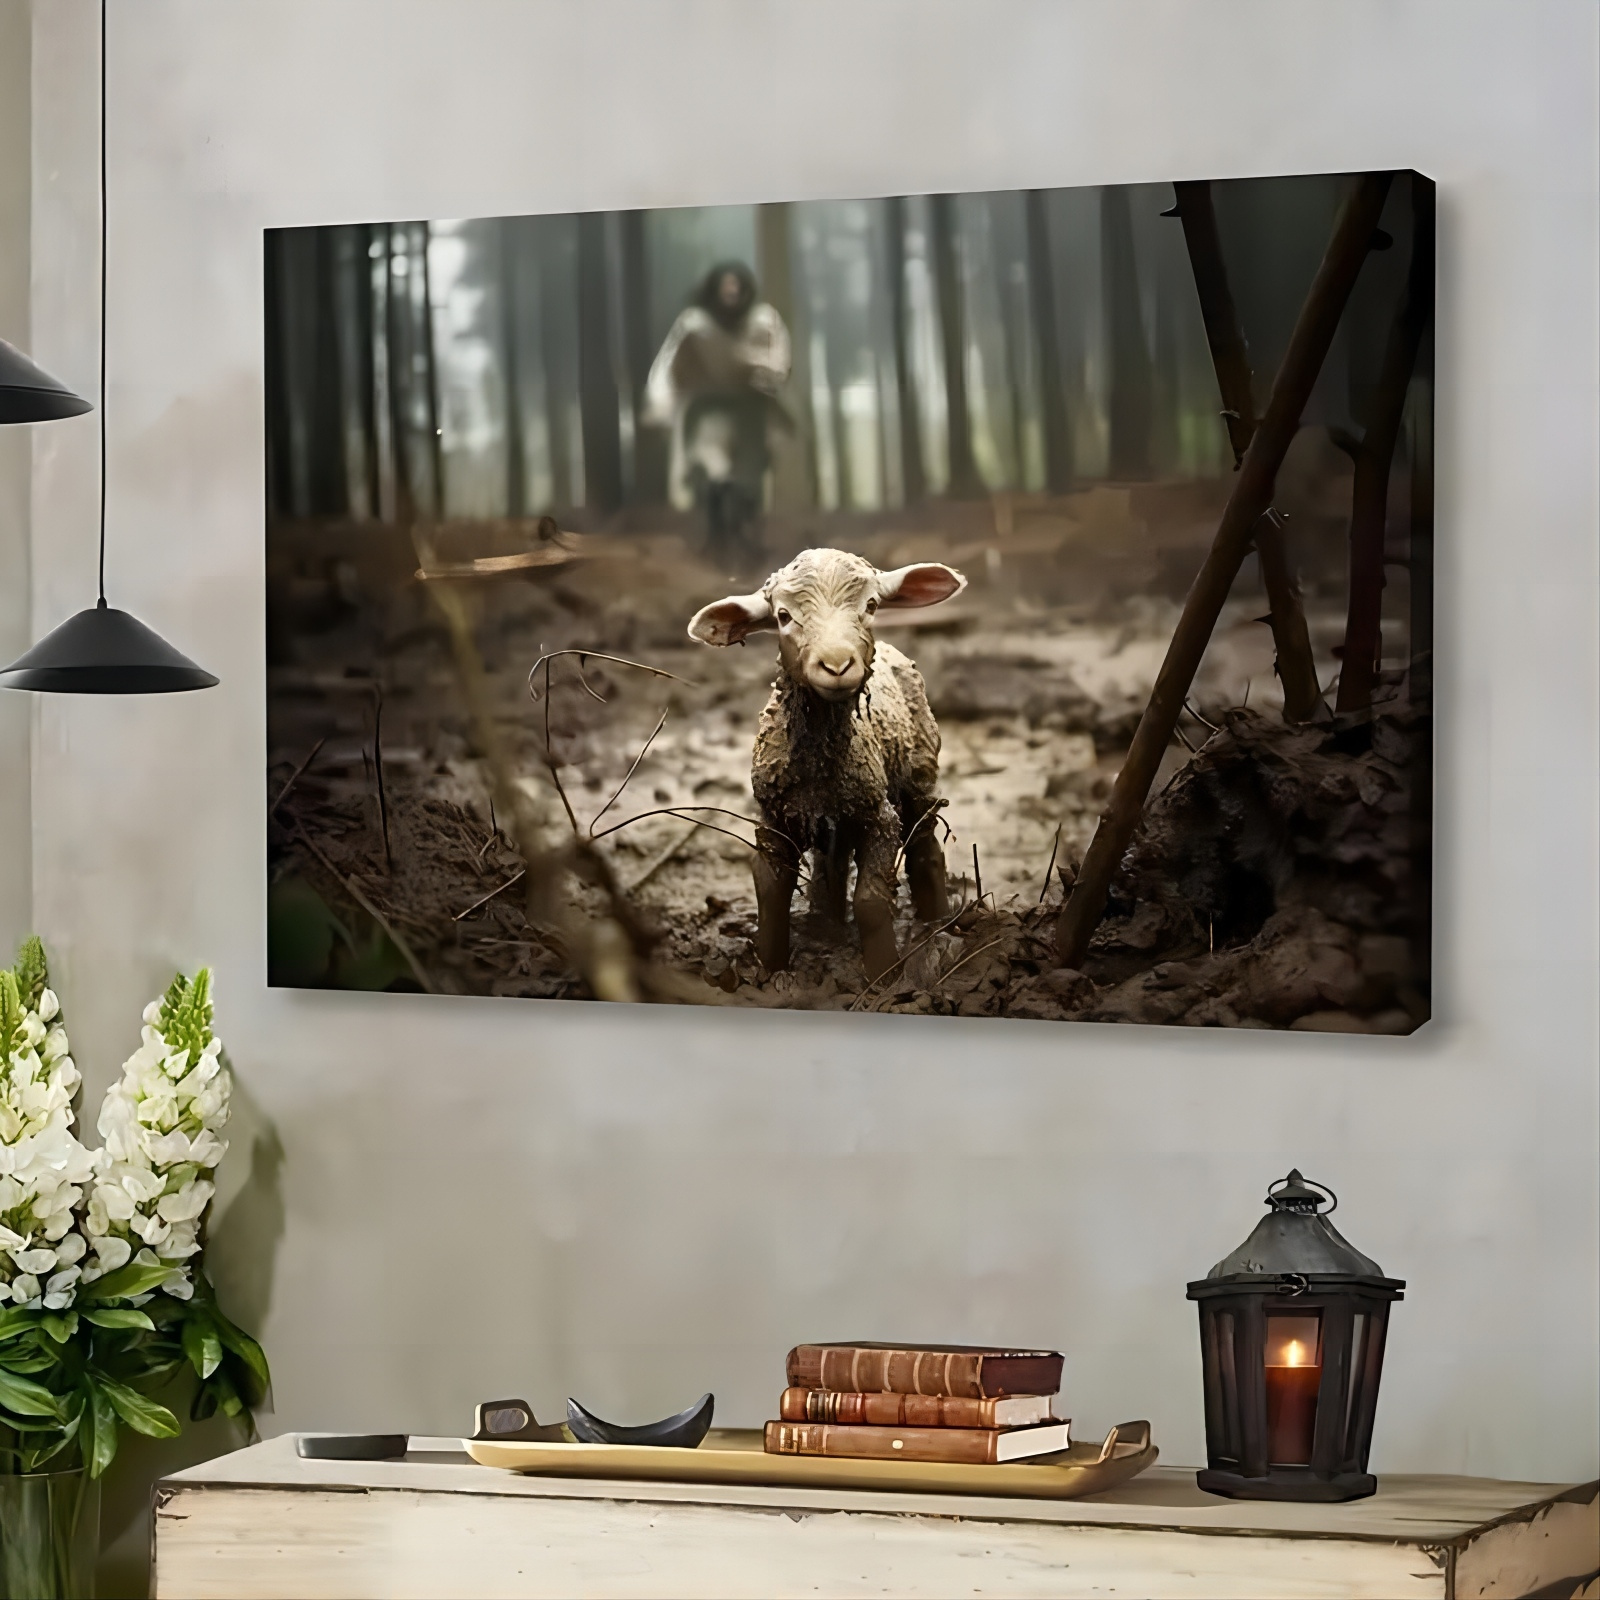 

1pc Wooden Framed Running After A Lost Lamb Lamb Of Wall Art Canvas Canvas Decor Wall Art For Bedroom Living Room Home Walls Decoration With Framed Ready To Hang